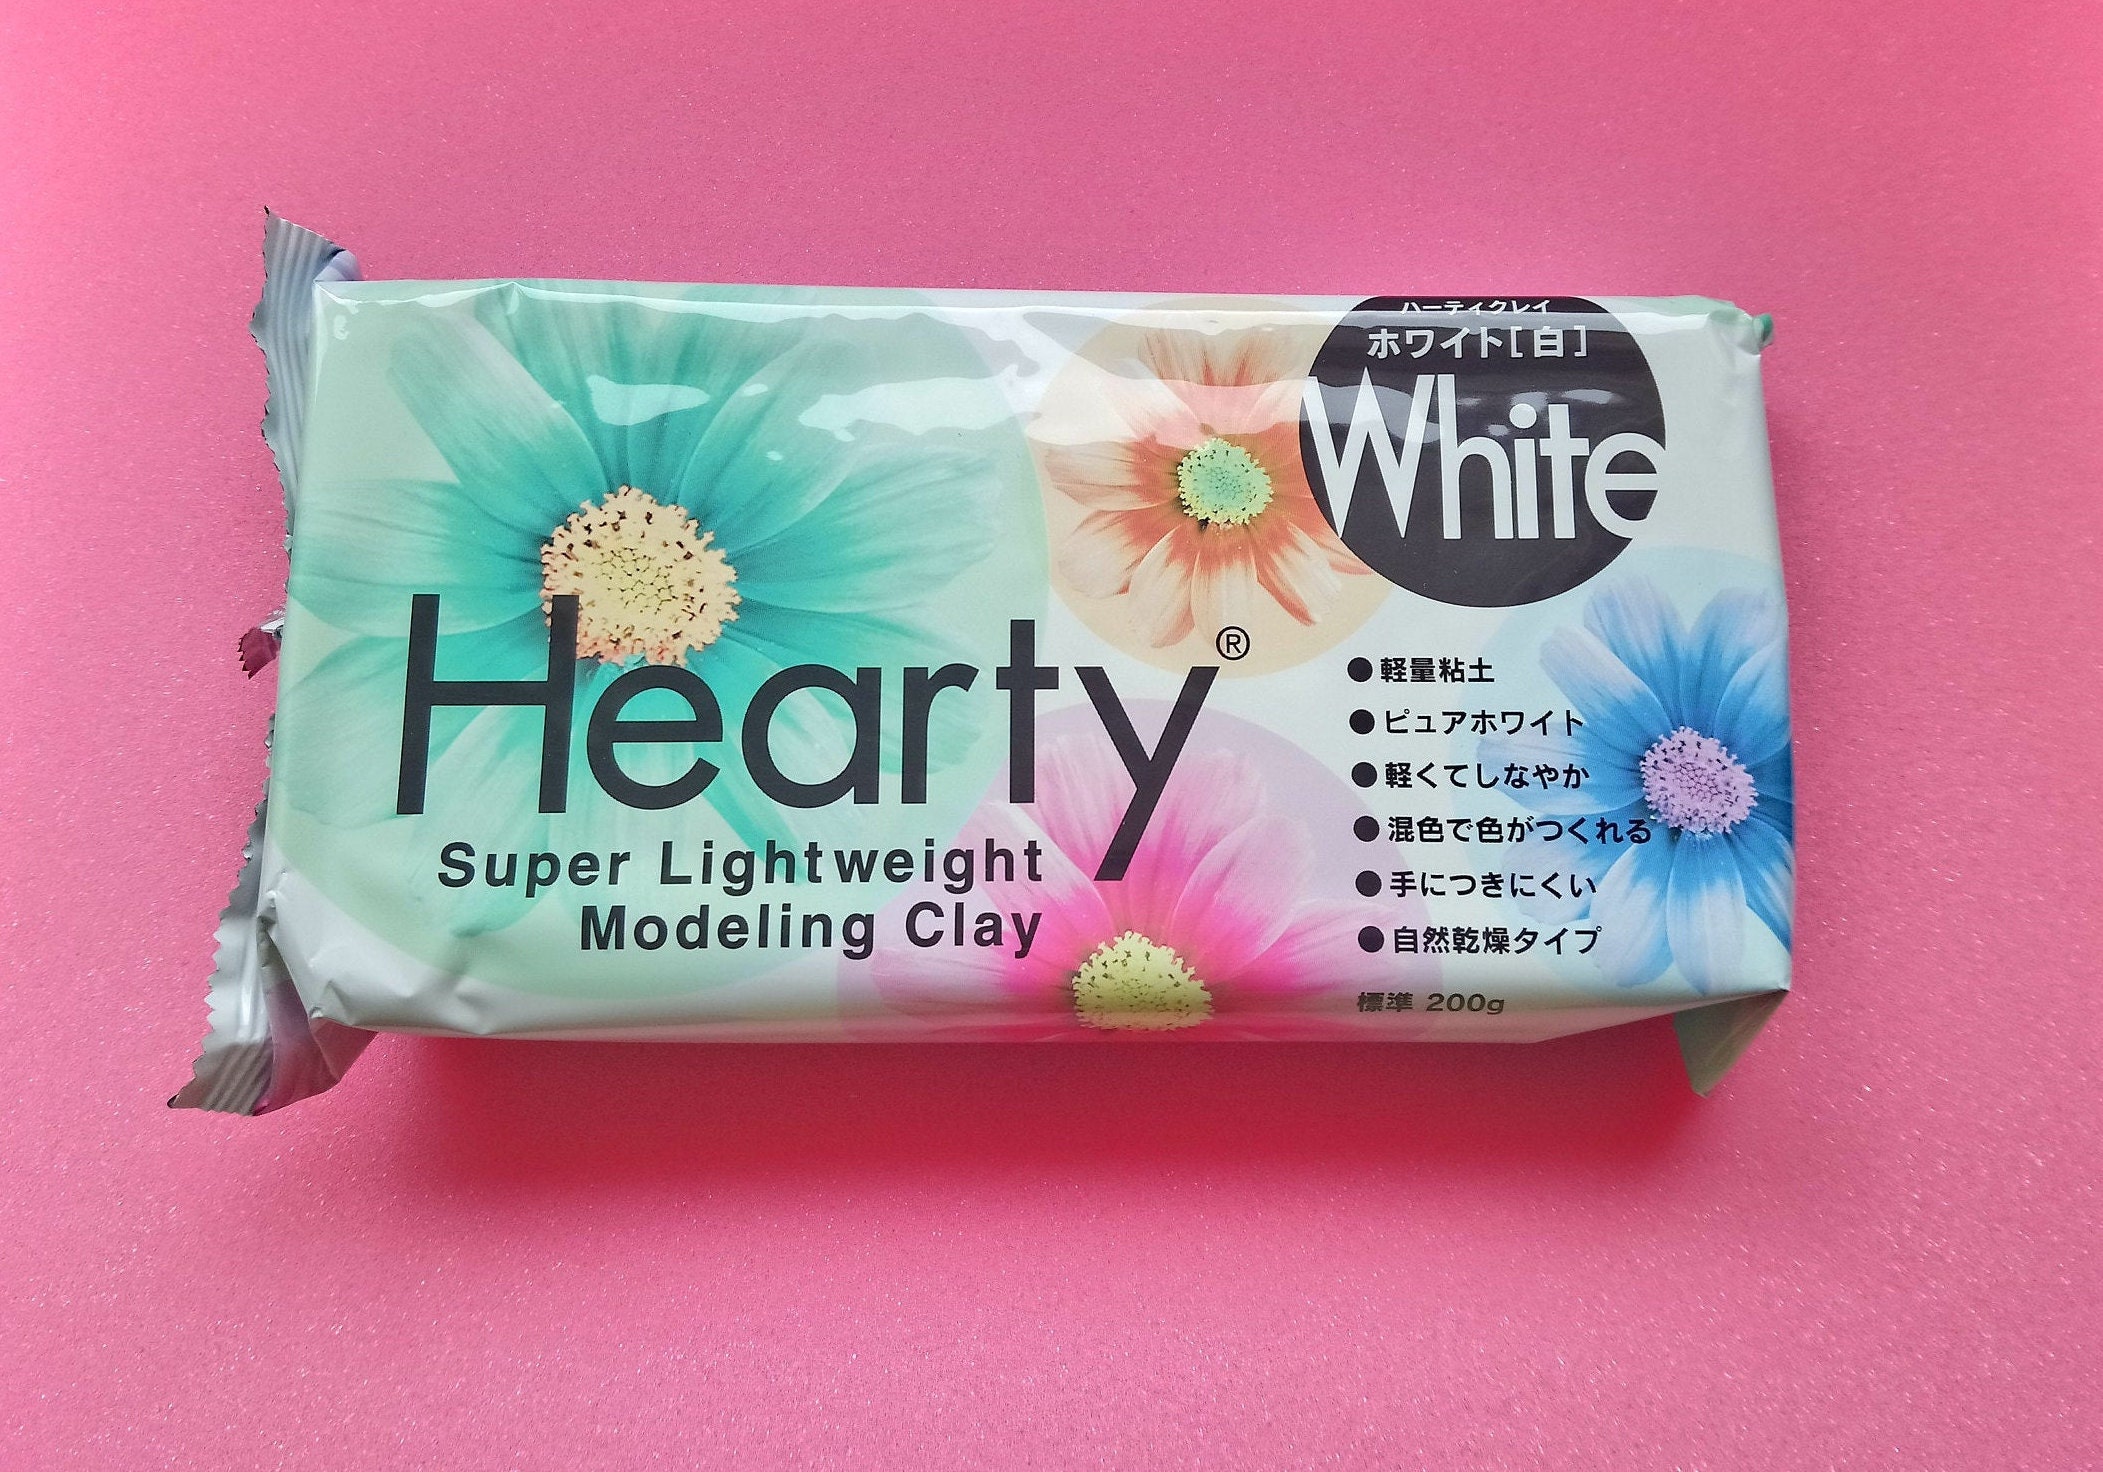 KMC Air Dry Clay Air Dry Clay for Jewelry, Sculpting, Crafting, Soft and  Light Air Dry Modeling Clay, White Air Dry Clay 0.55 Lb 250g 